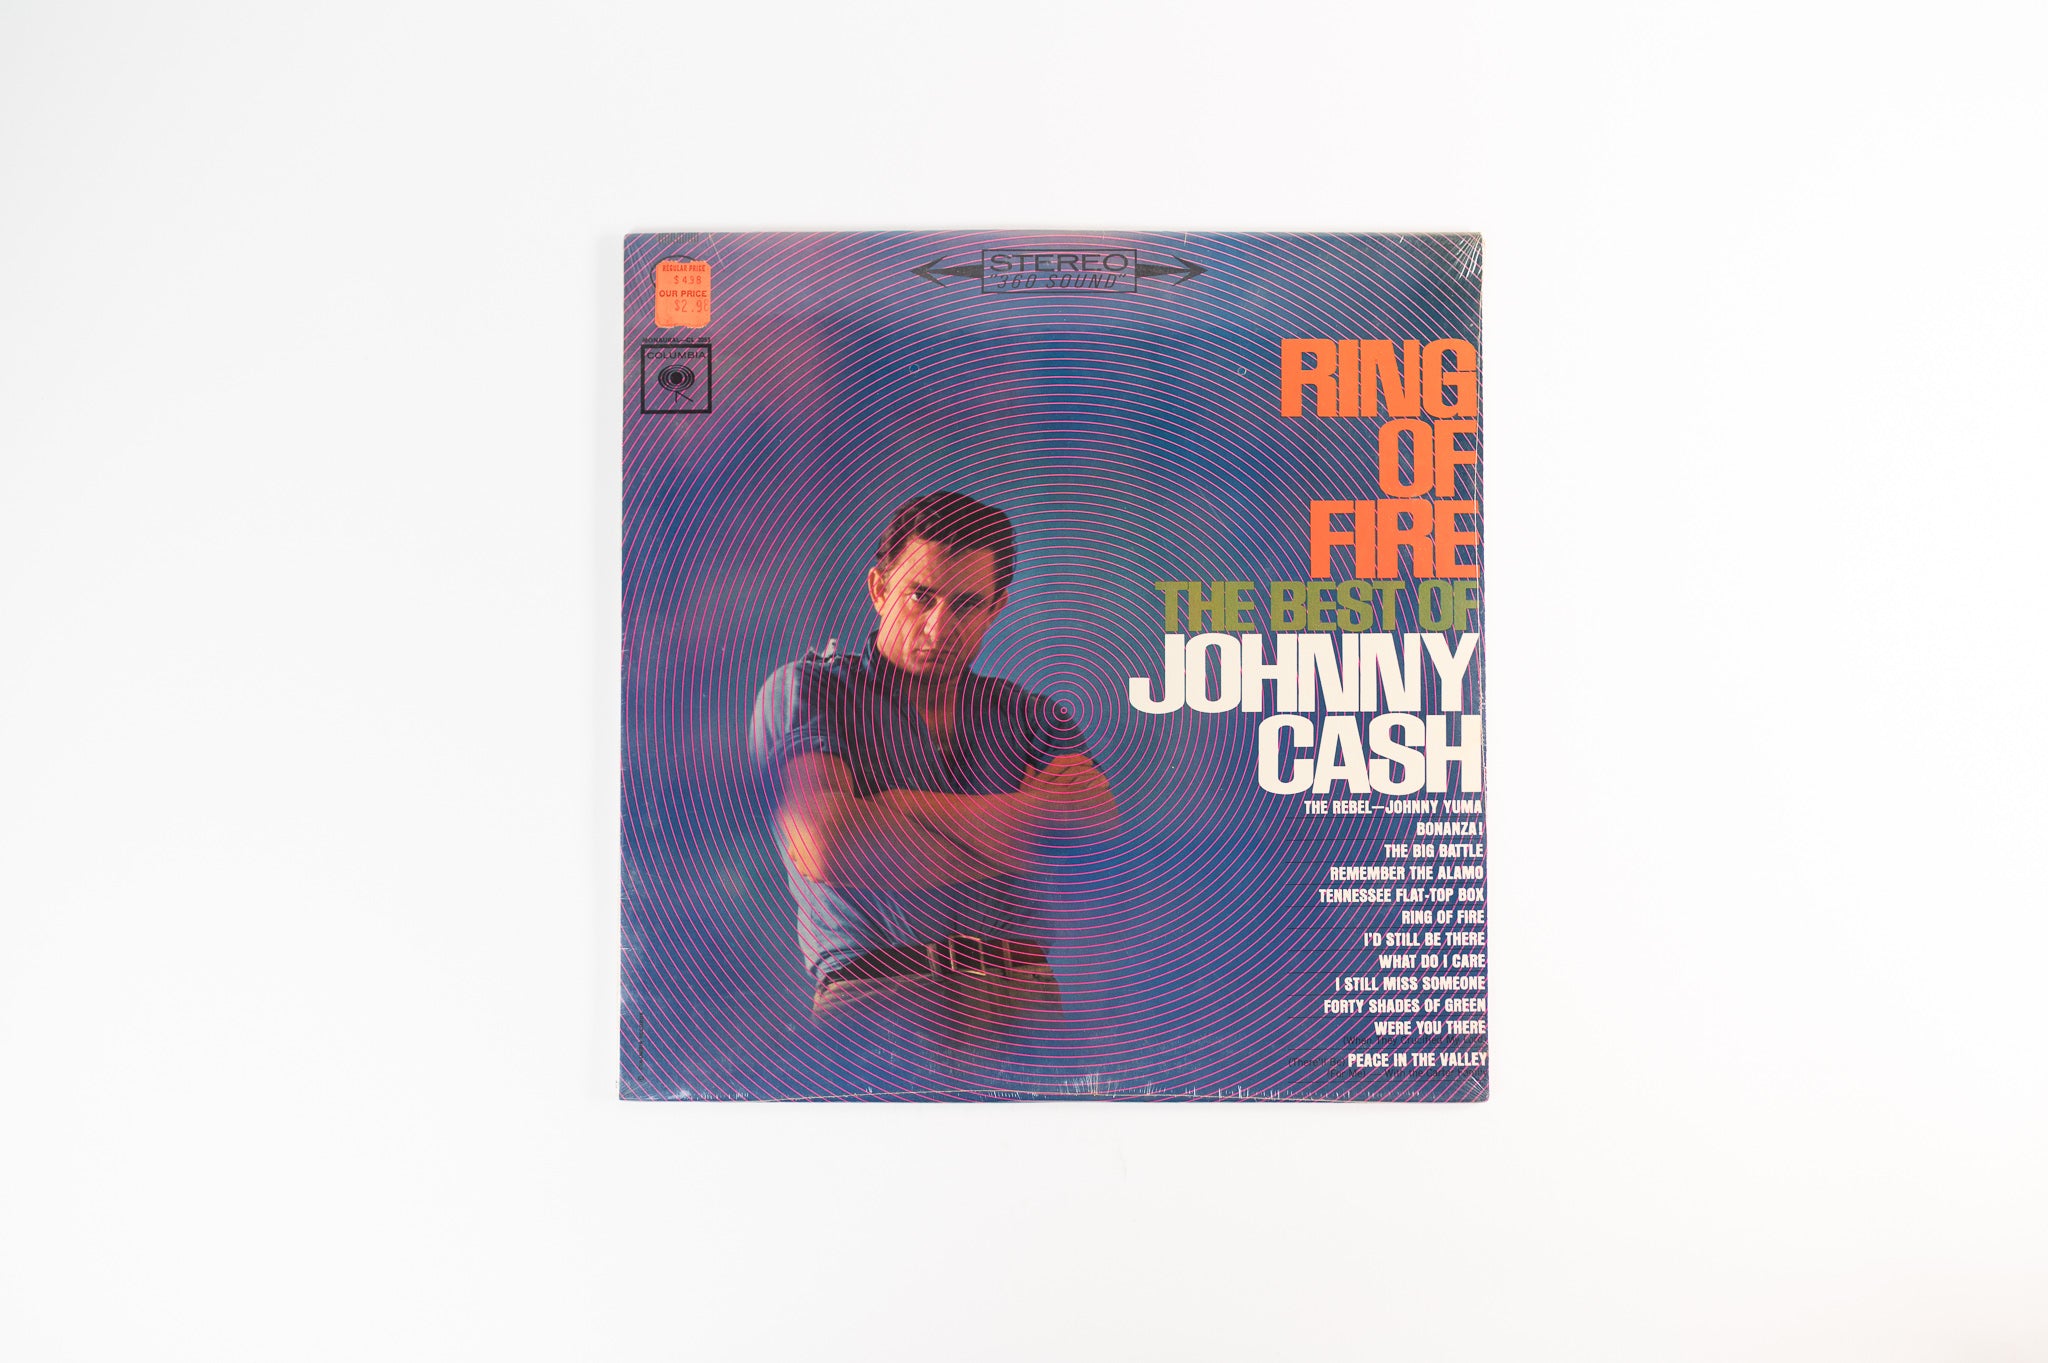 Johnny Cash - Ring Of Fire  (The Best Of Johnny Cash) on Columbia